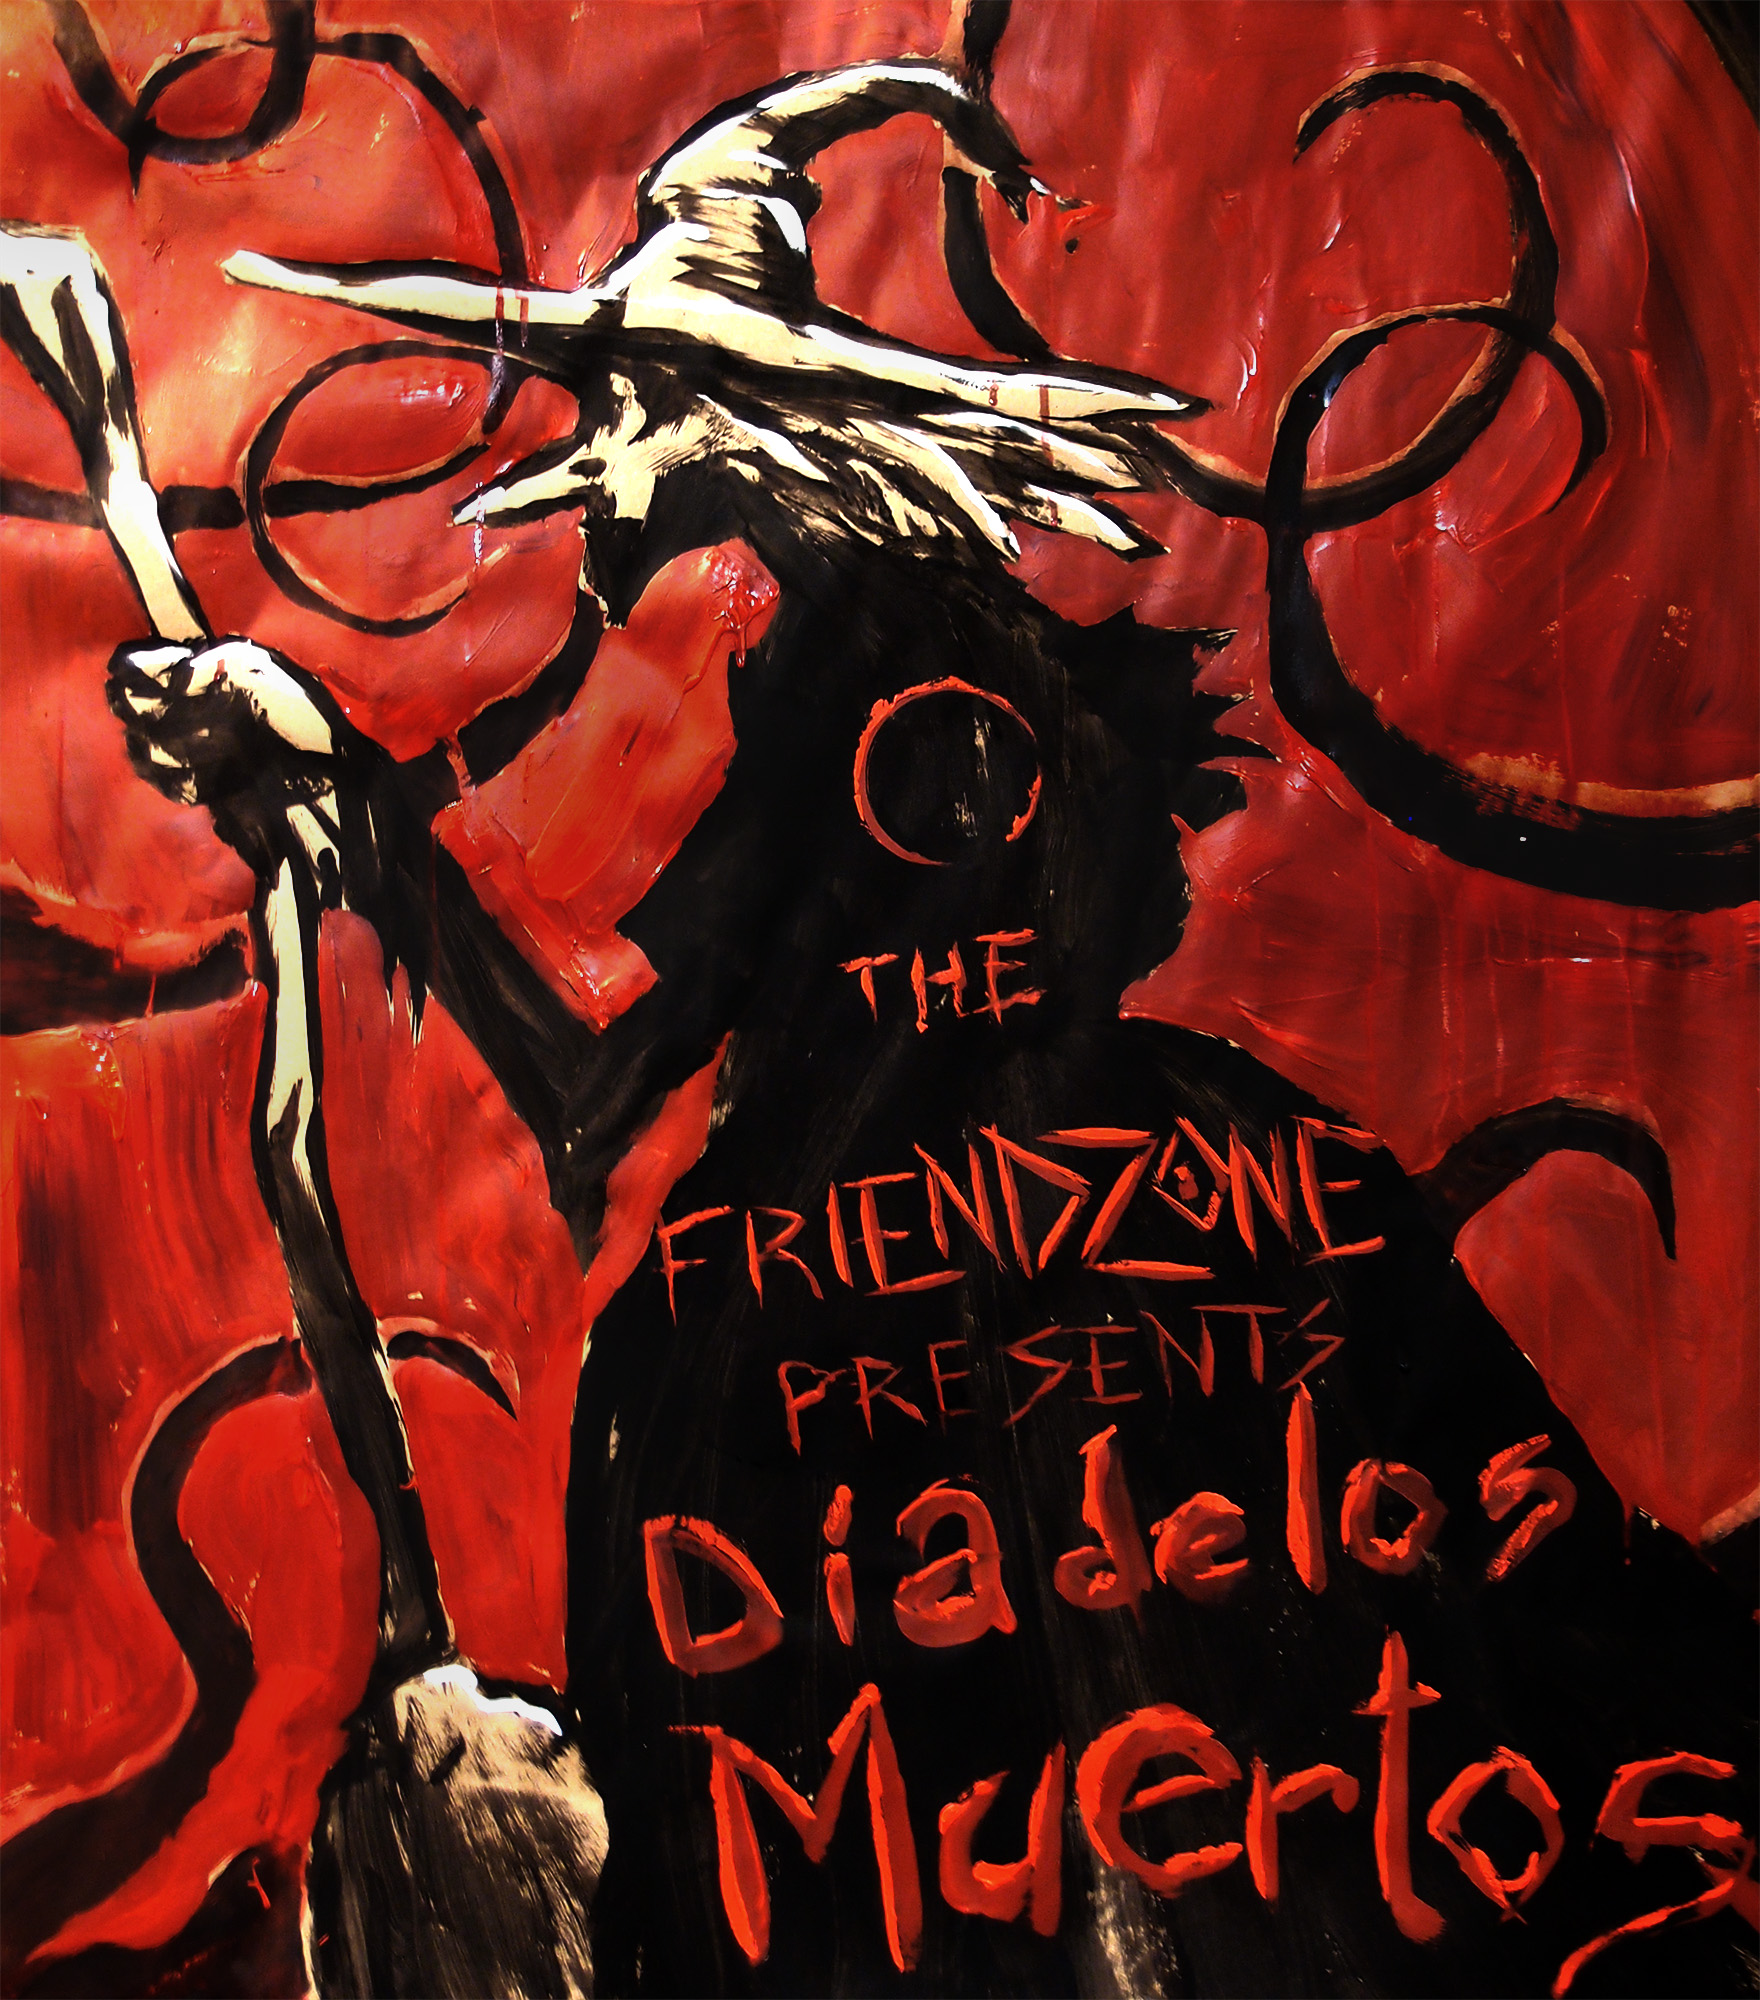 The Friendzone poster: acrylic on paper